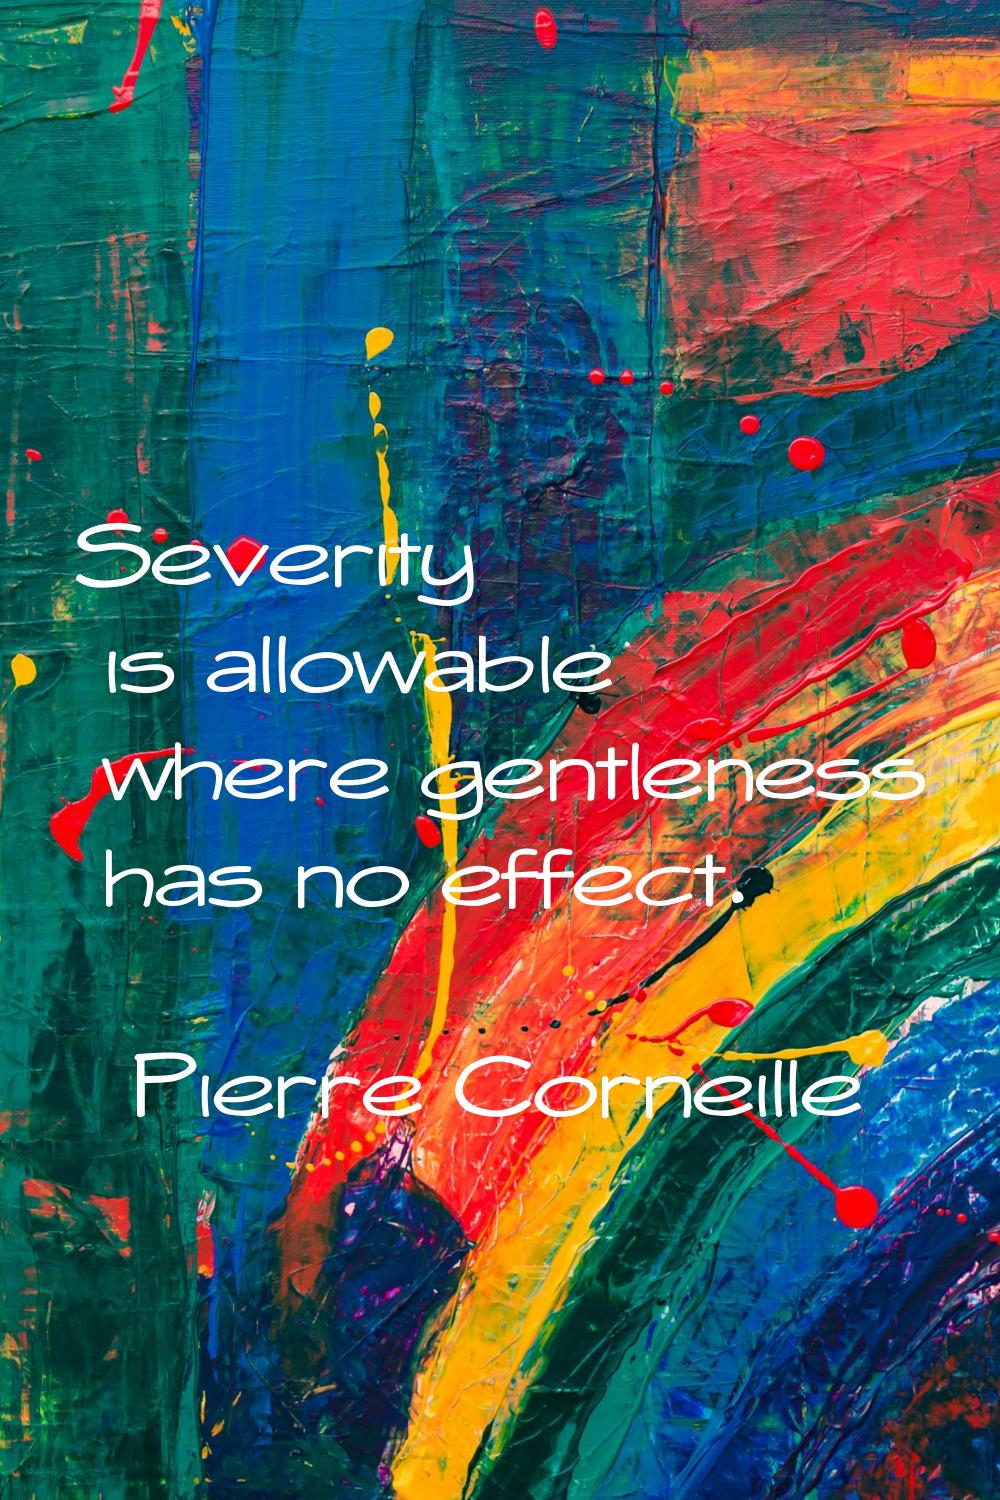 Severity is allowable where gentleness has no effect.